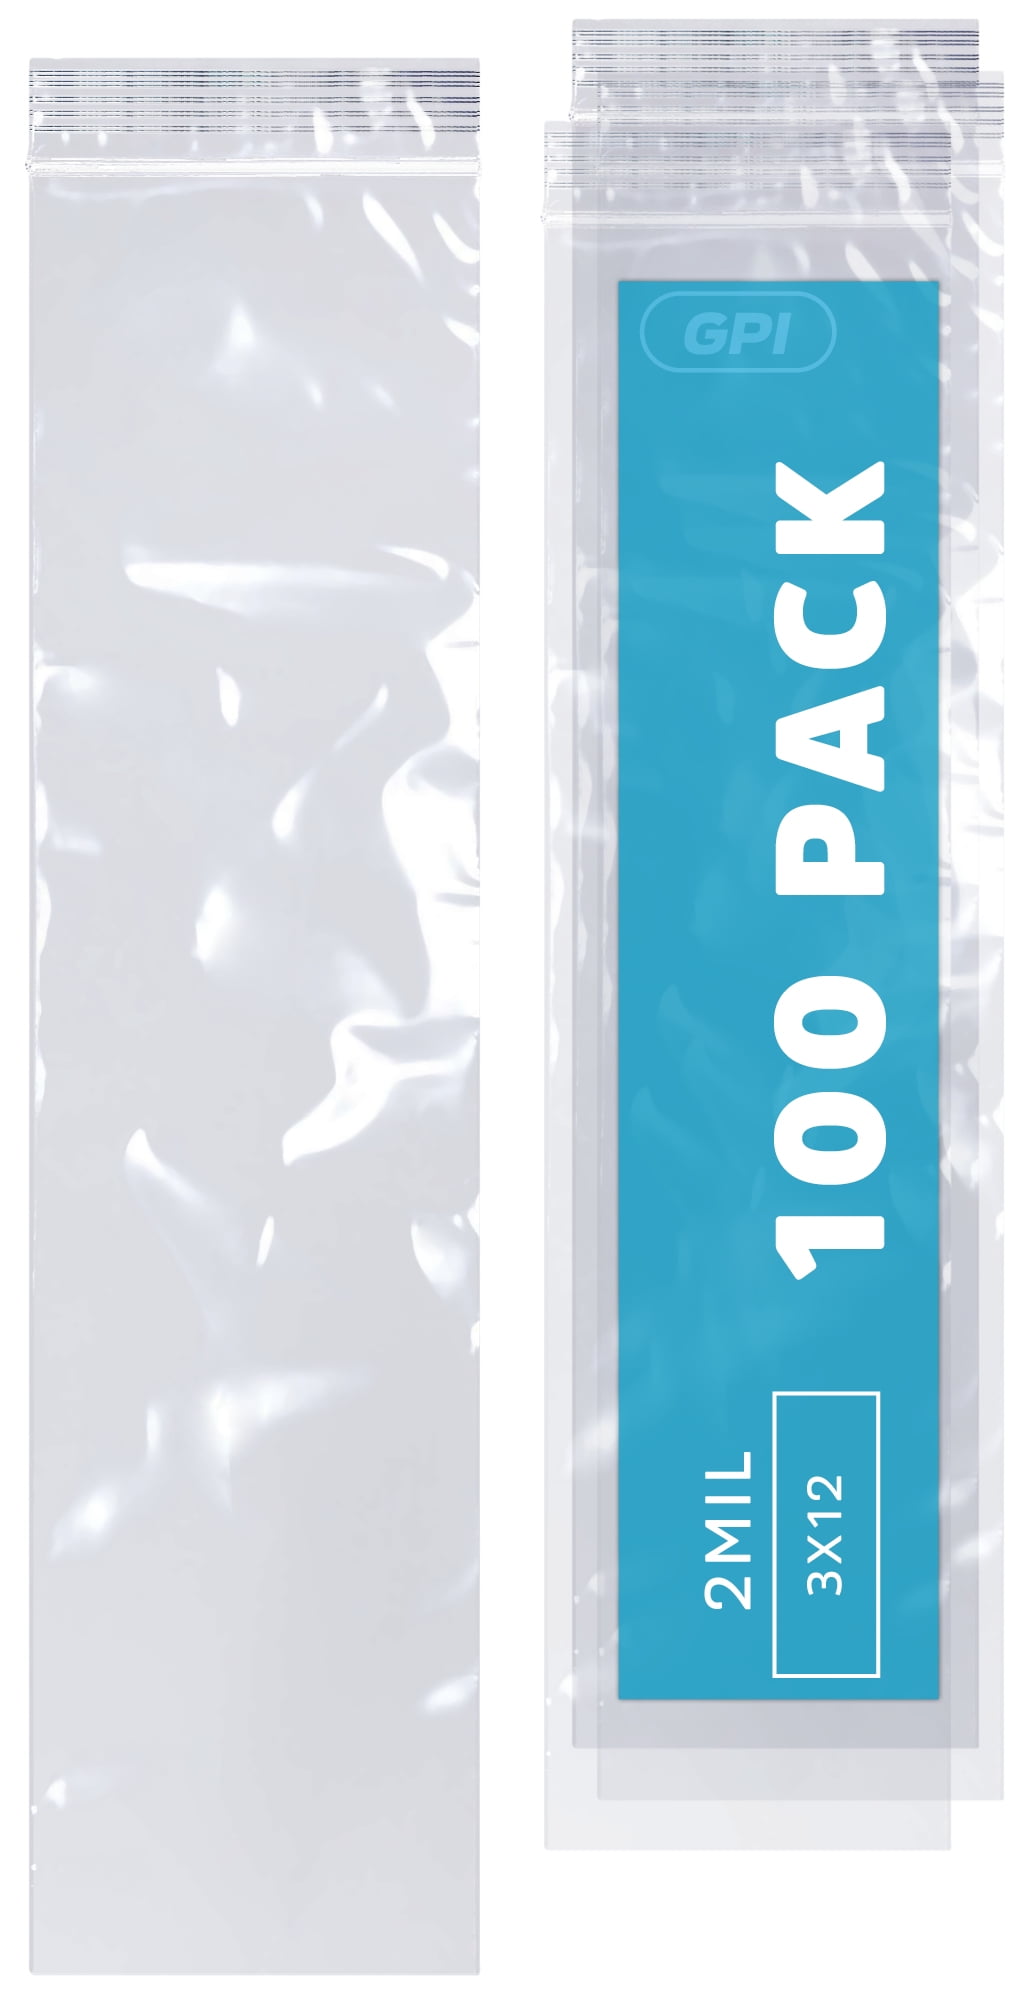 Bulk 2 mil Thick Strong & Durable Poly Baggies with Resealable Zip Top Lock for Travel 10 x 10 Large GPI Pack of 200 Clear Plastic Reclosable Zip Bags Packaging & Shipping. Storage 